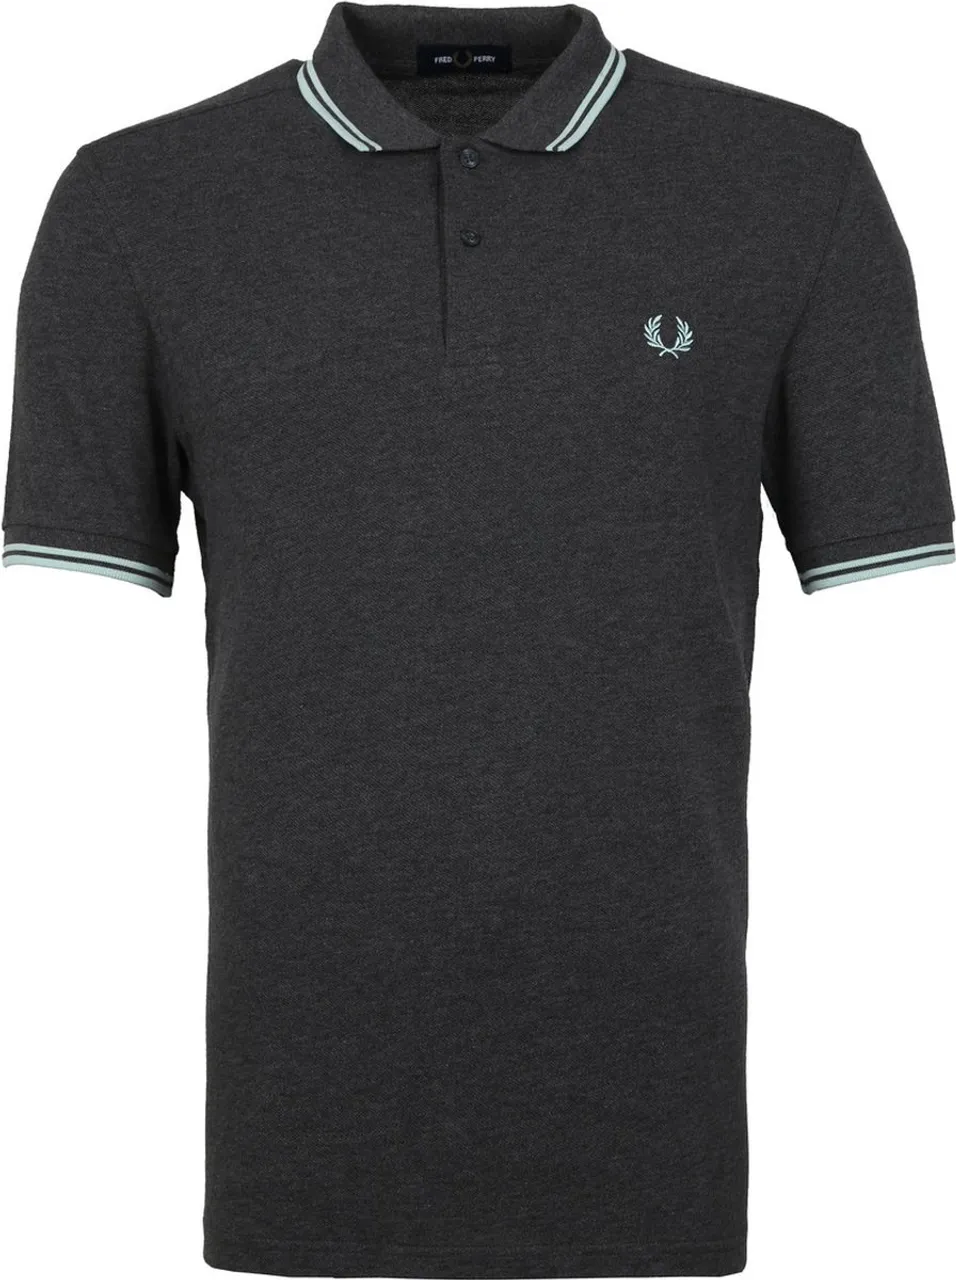 Fred Perry - Polo M3600 Antraciet N49 - Slim-fit - Heren Poloshirt